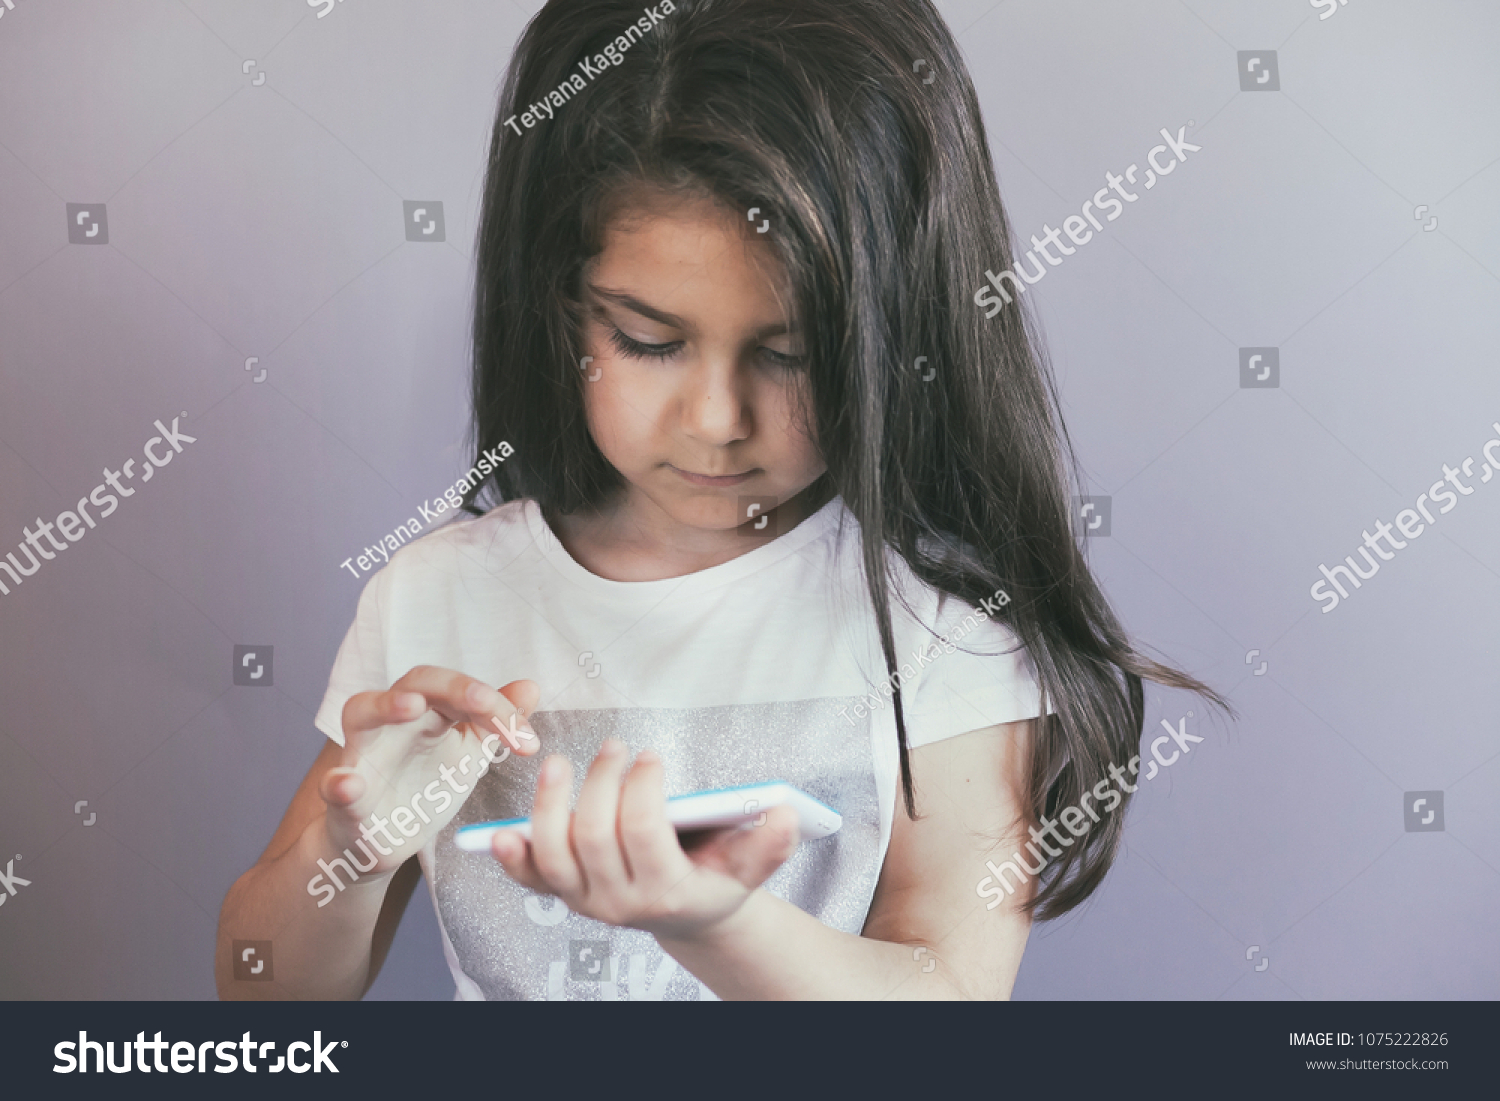 leisure, childhood, technology and people concept - cute little girl child with gadget. Toned image. #1075222826